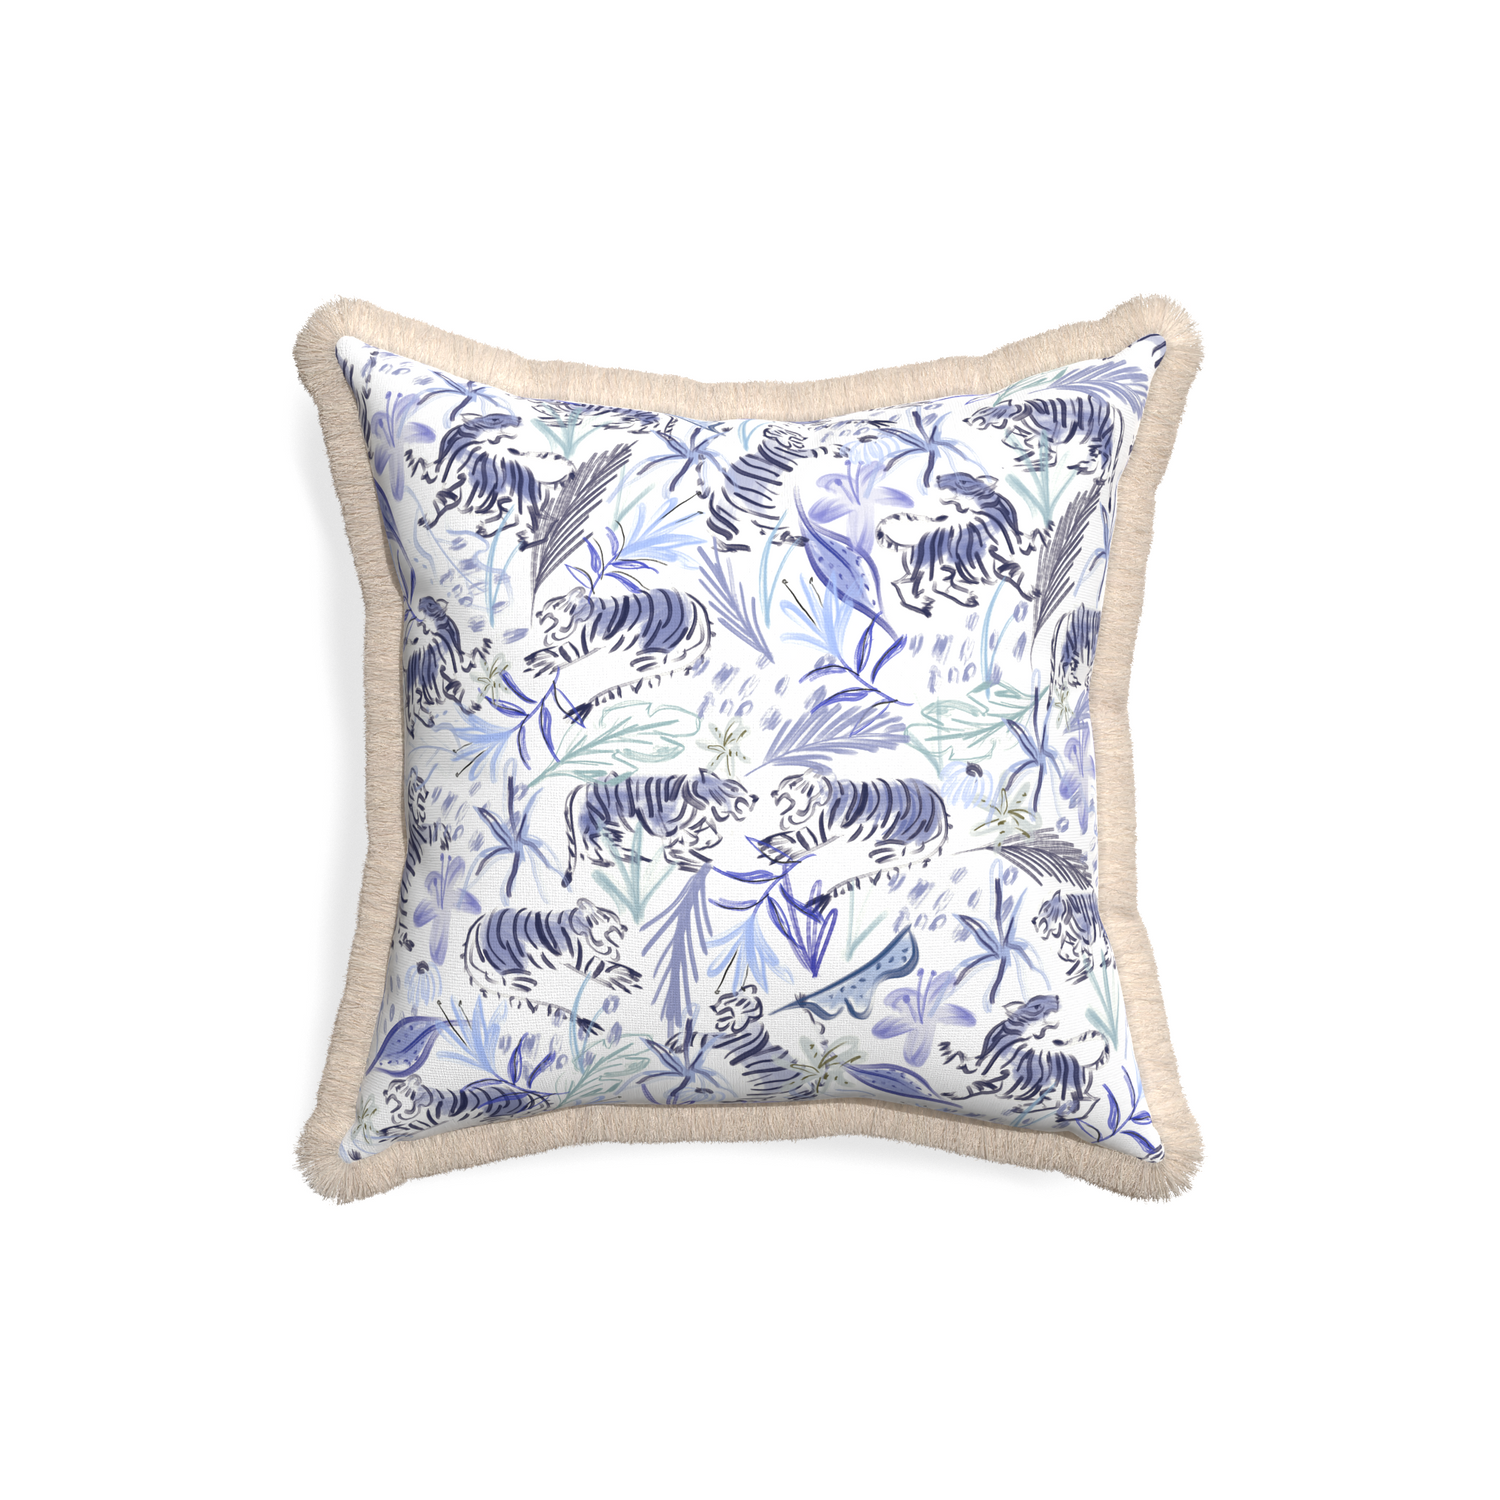 18-square frida blue custom blue with intricate tiger designpillow with cream fringe on white background